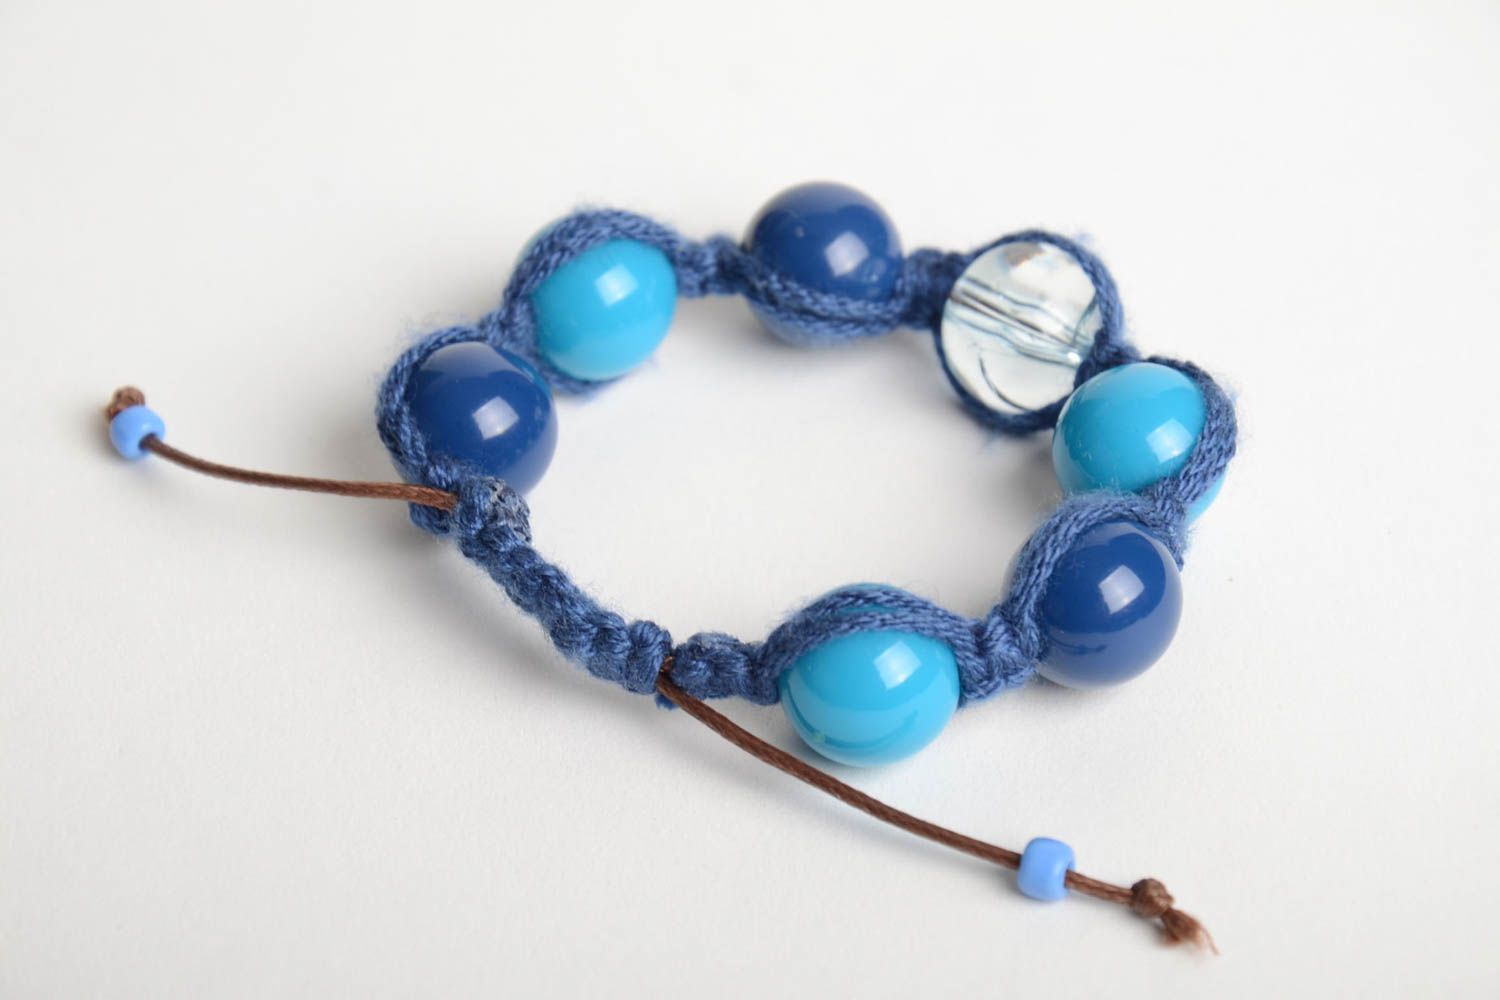 Handmade wrist bracelet crocheted of cord and plastic beads in blue color shades photo 5